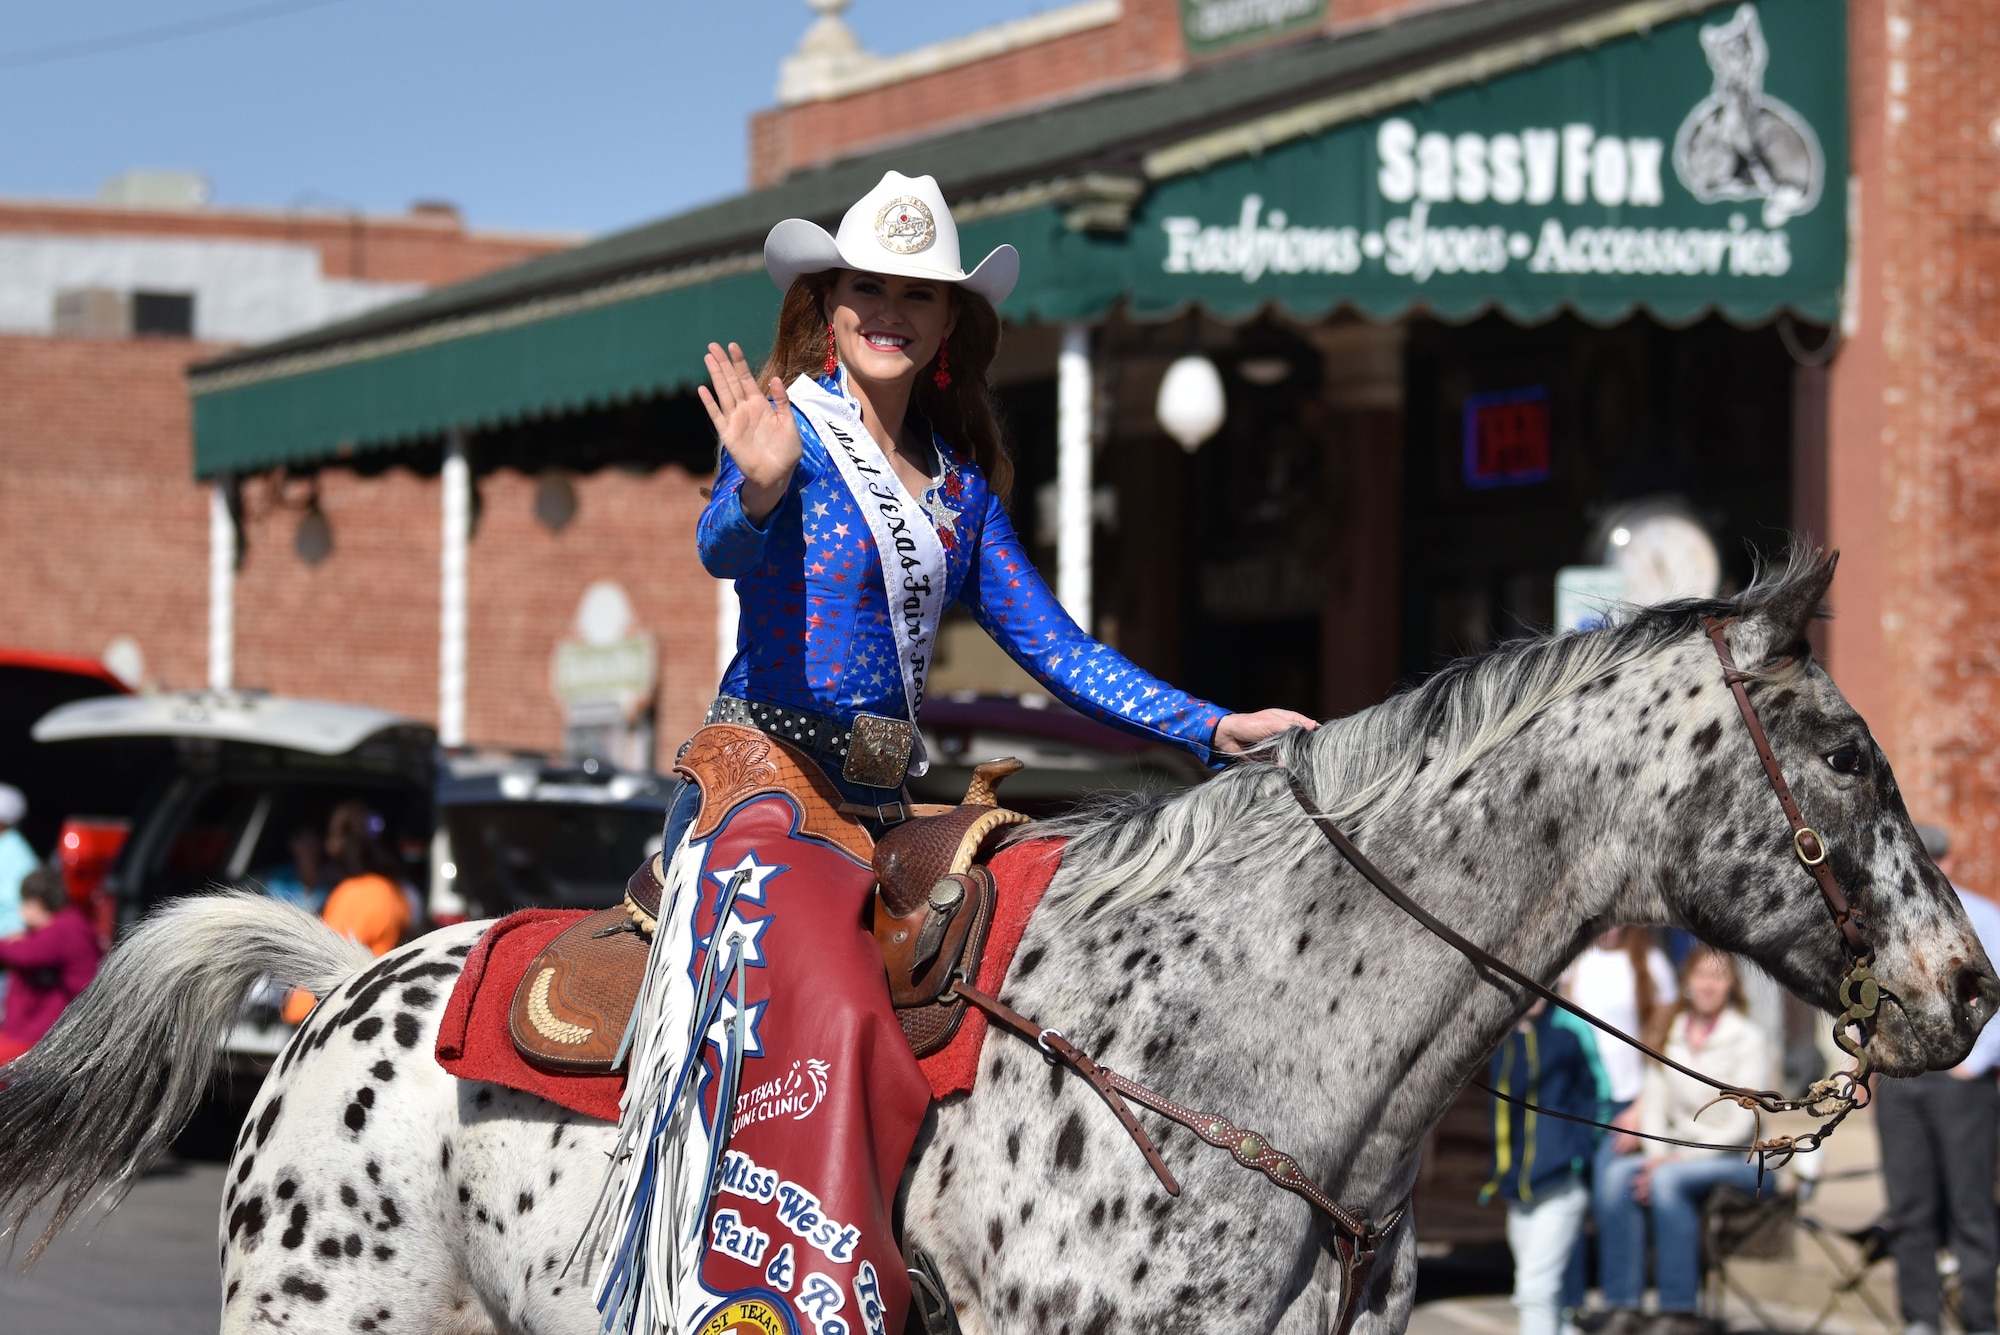 Bobbi Loran, Miss West Texas Fair and Rodeo, rides in the 89th Annual San Angelo Rodeo parade through downtown San Angelo, Texas, April 10, 2021. Competitors come from all different backgrounds, some even from out of state. (U.S. Air Force photo by Staff Sgt. Seraiah Wolf)